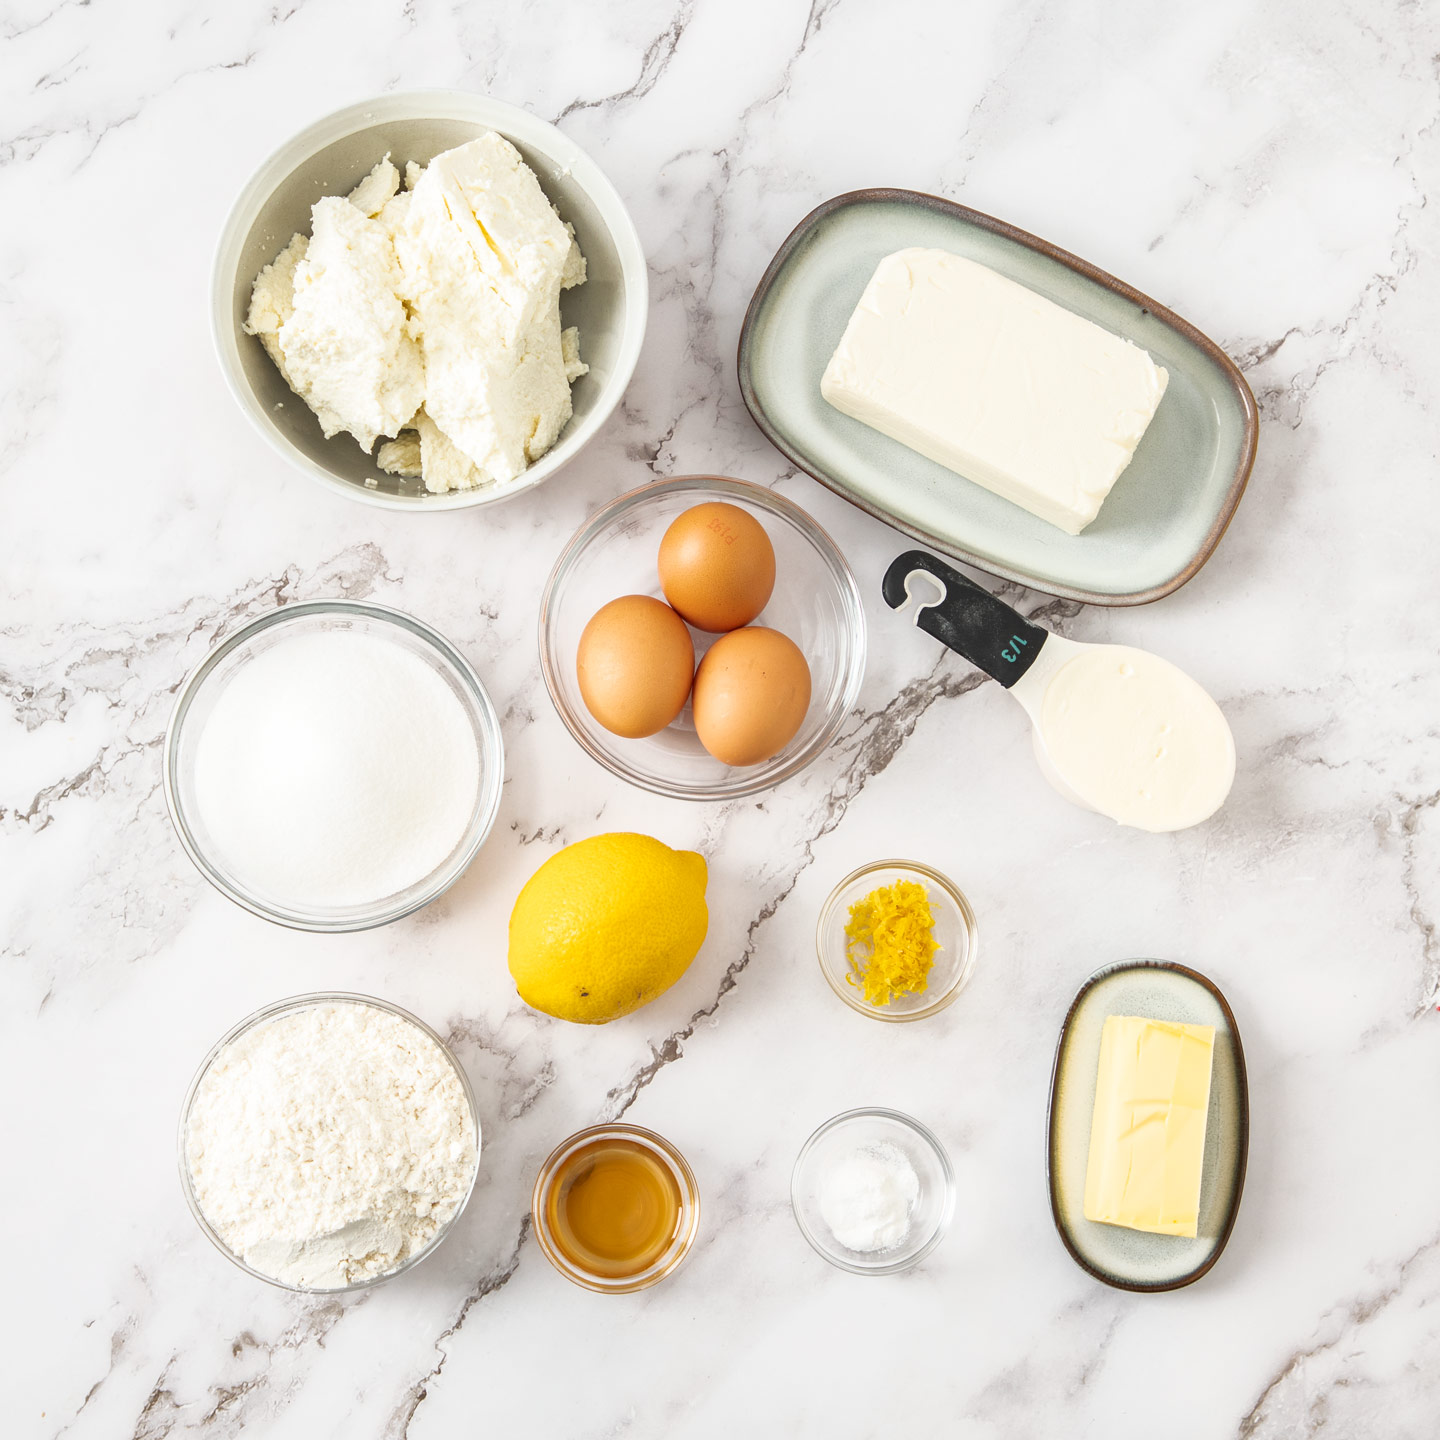 Ingredients for baked ricotta cheesecake on a marble surface.